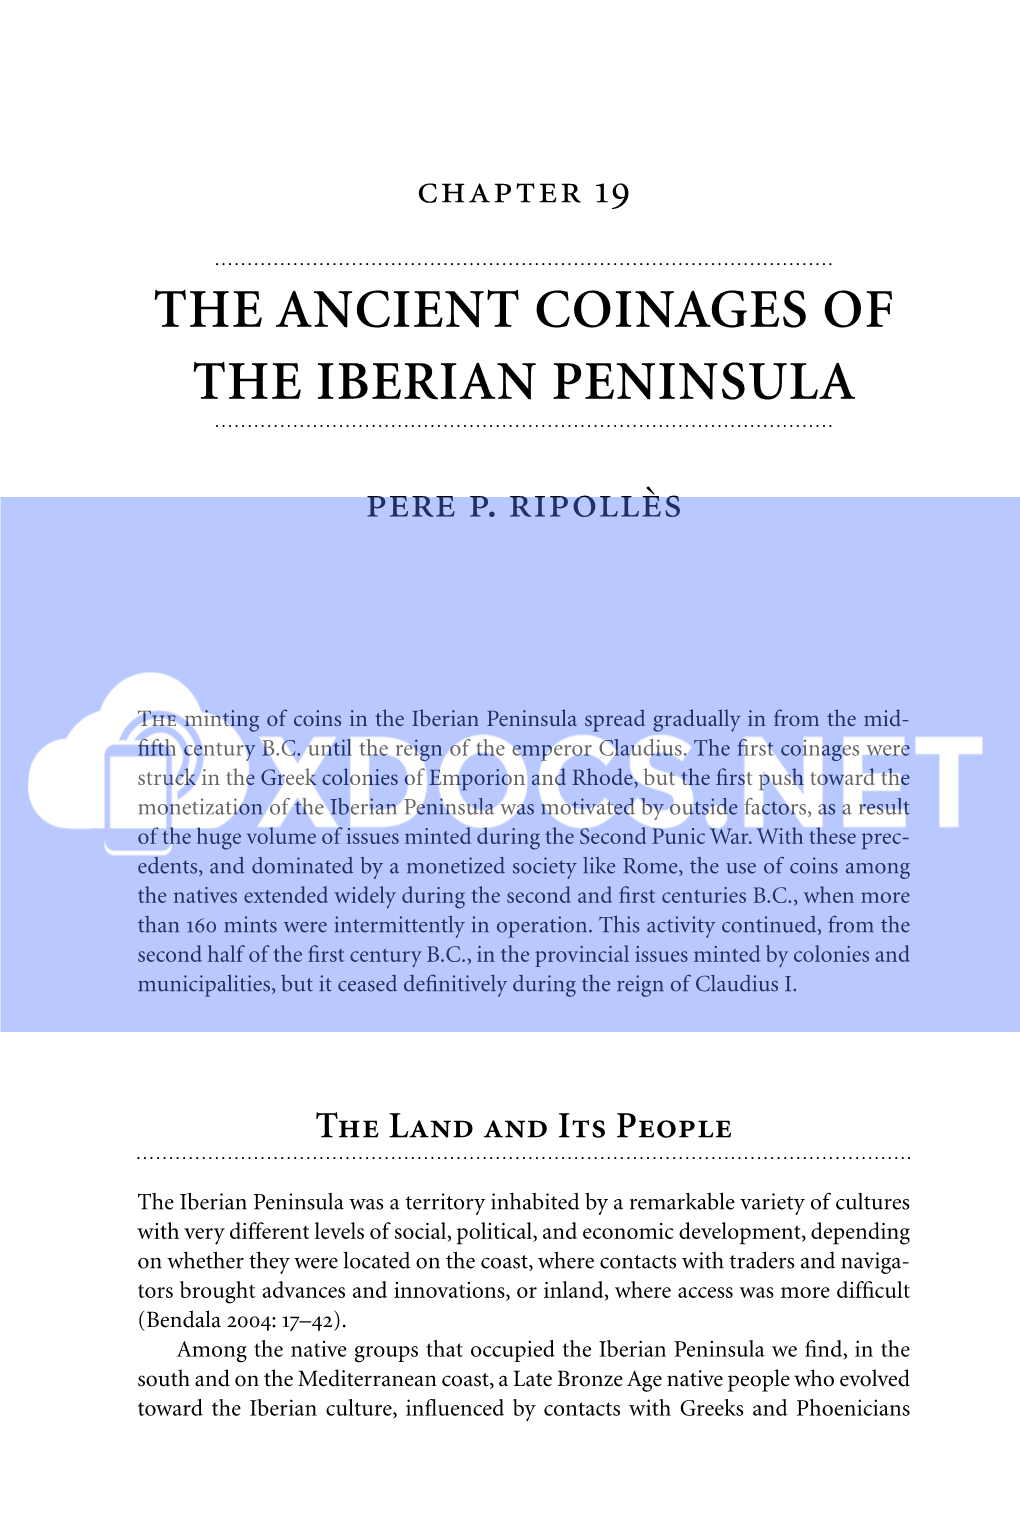 The Ancient Coinages of the Iberian Peninsula